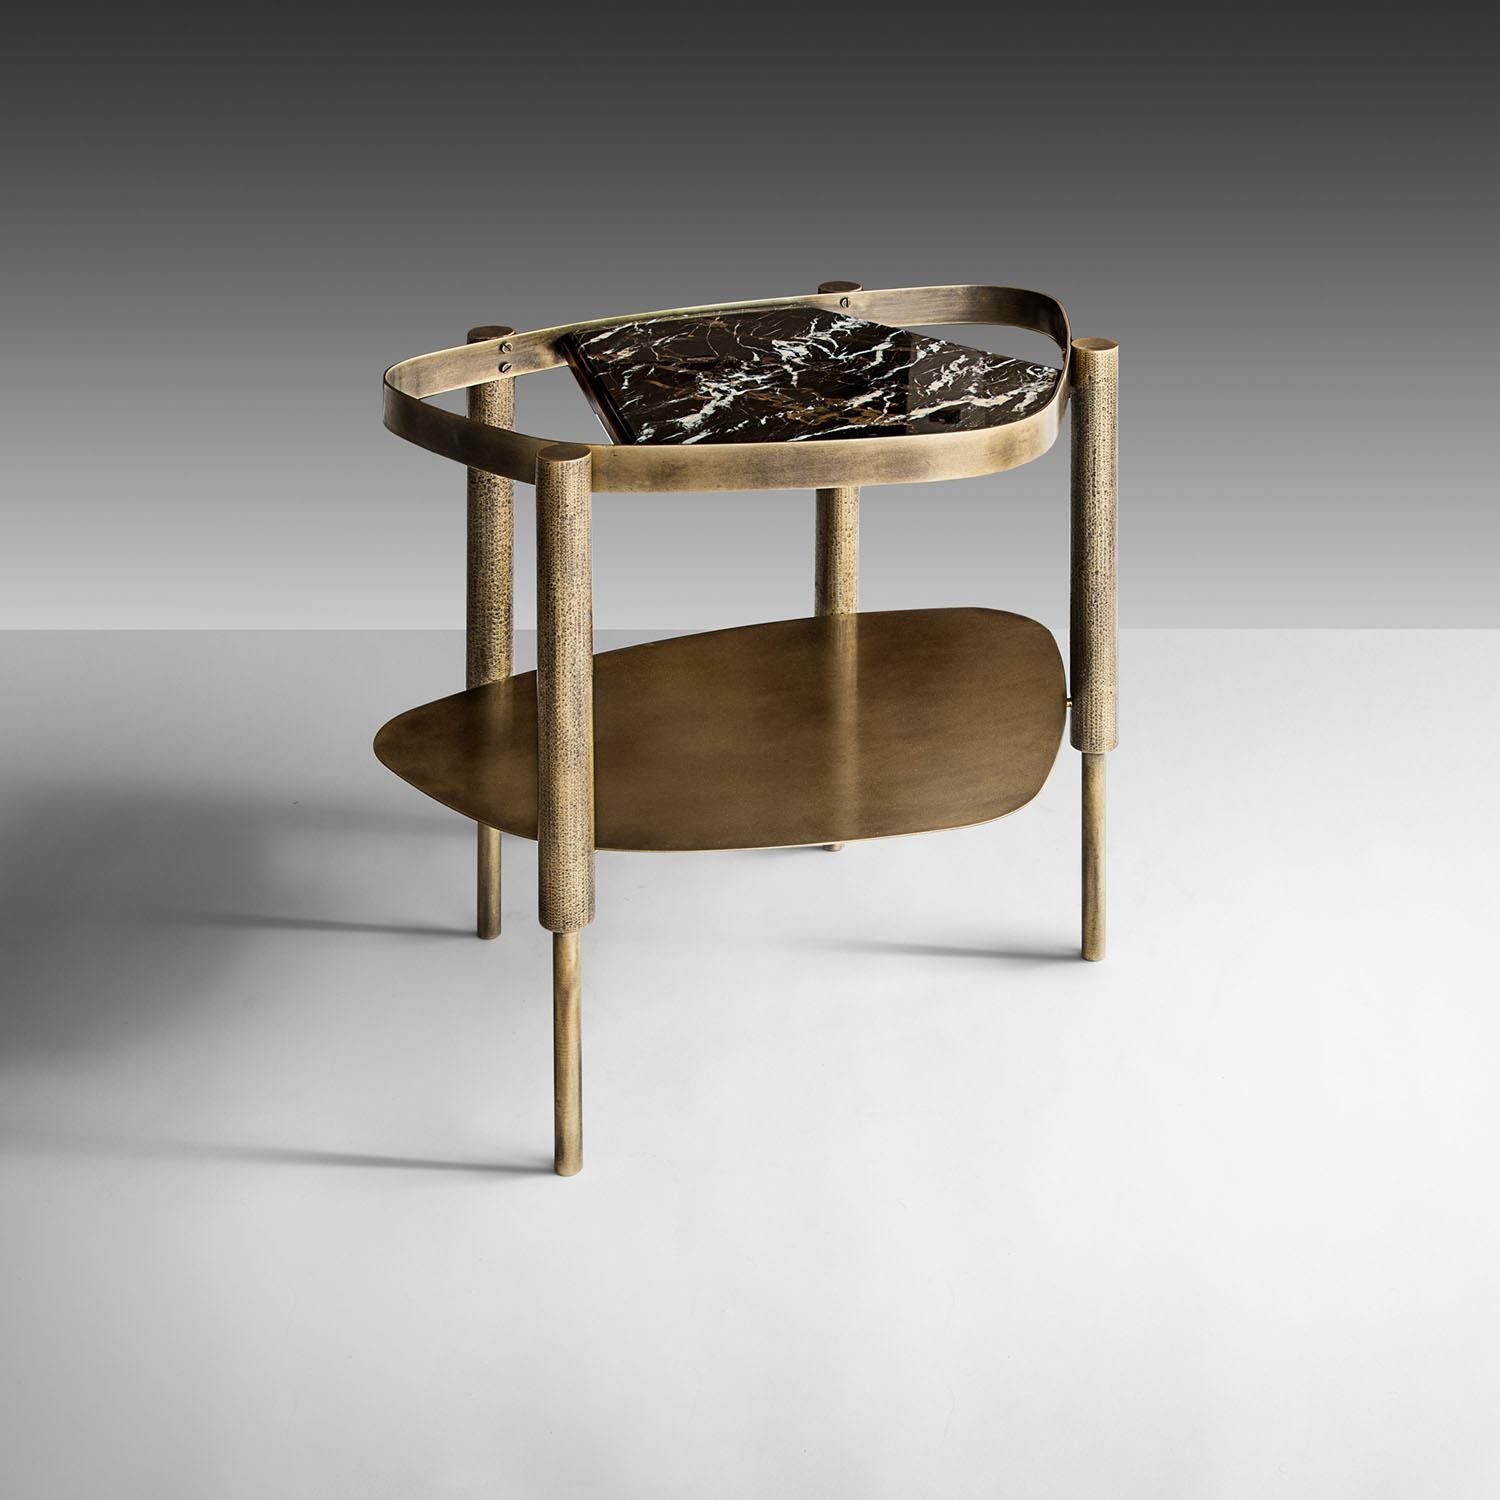 Contemporary marble & brass side table - bijou by Adam Court for Okha

Design: Adam Court

Material: oxidise brass frame clear / grey / bronze glass insert / marble insert options

Dimensions:
610W X 450D X 580H mm
24W X 17.7D X 22.8H